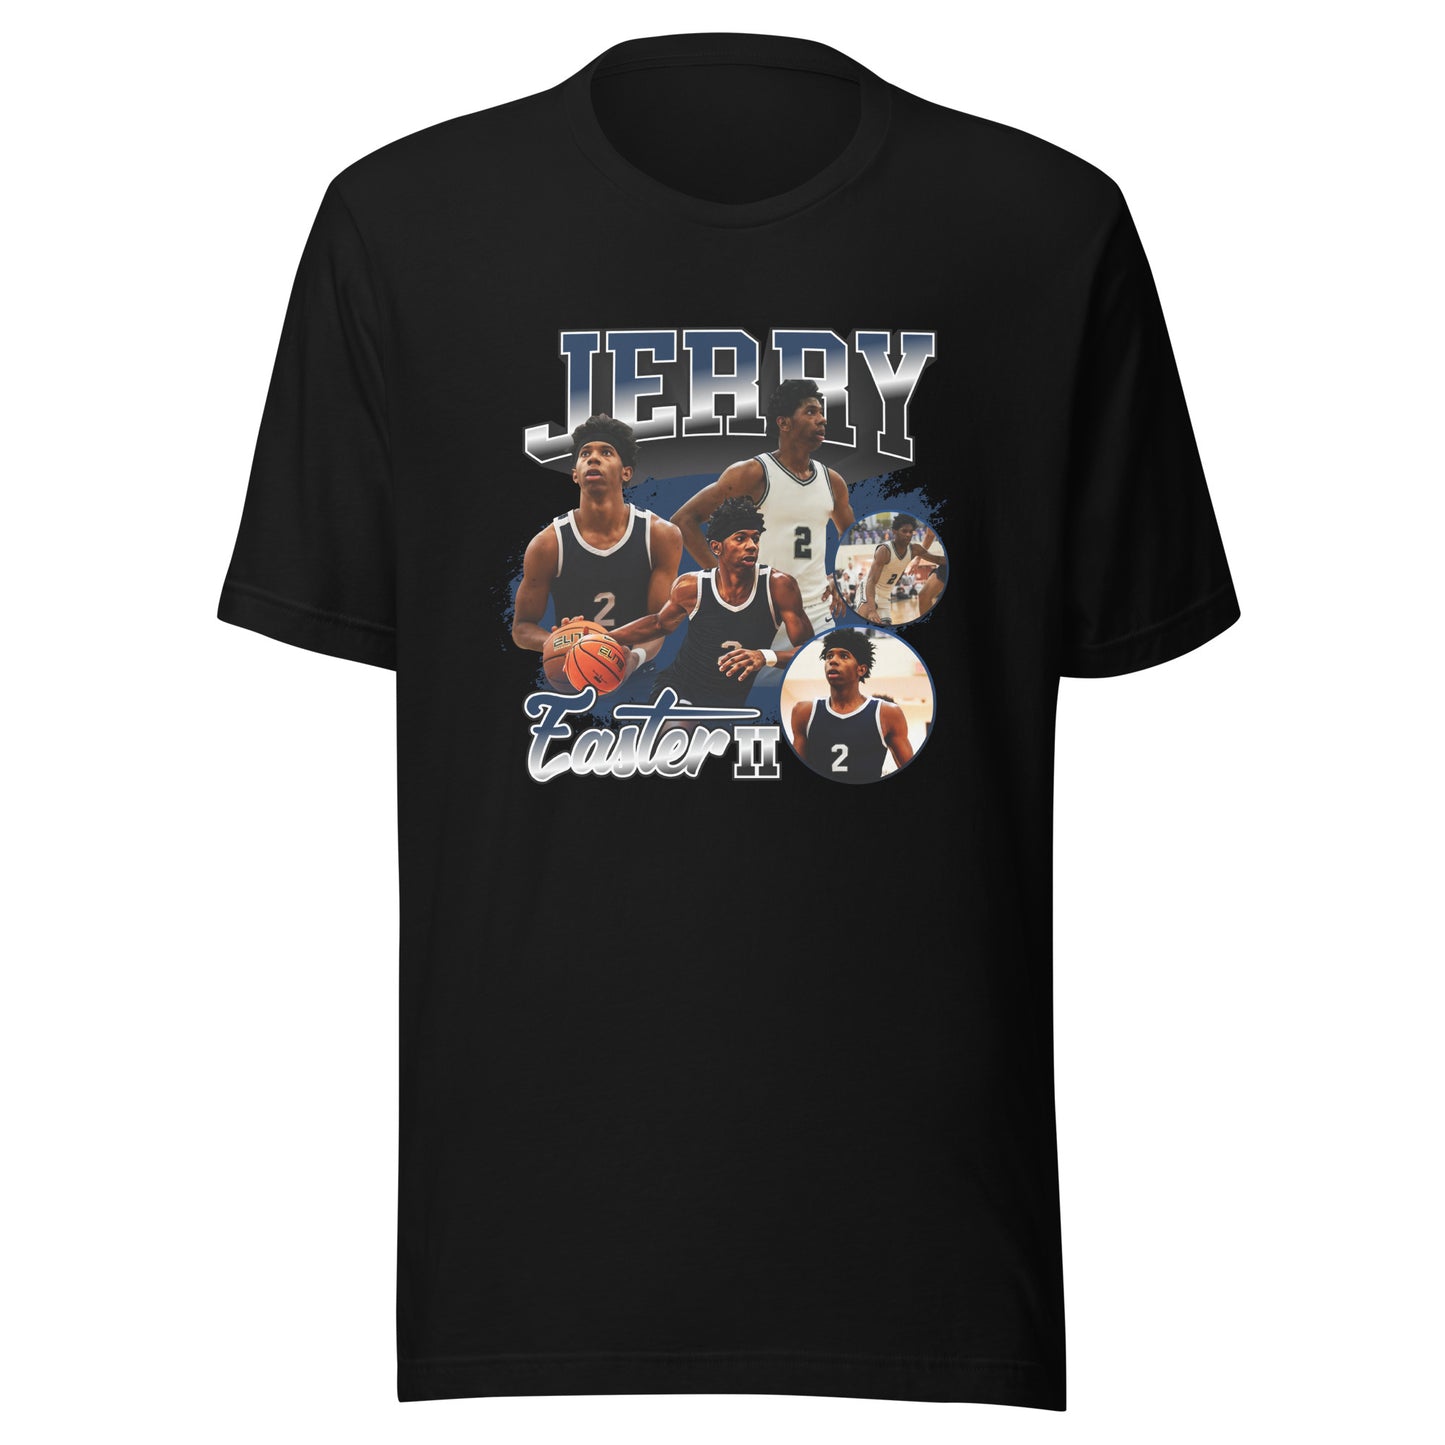 Jerry Easter "Vintage" t-shirt - Fan Arch